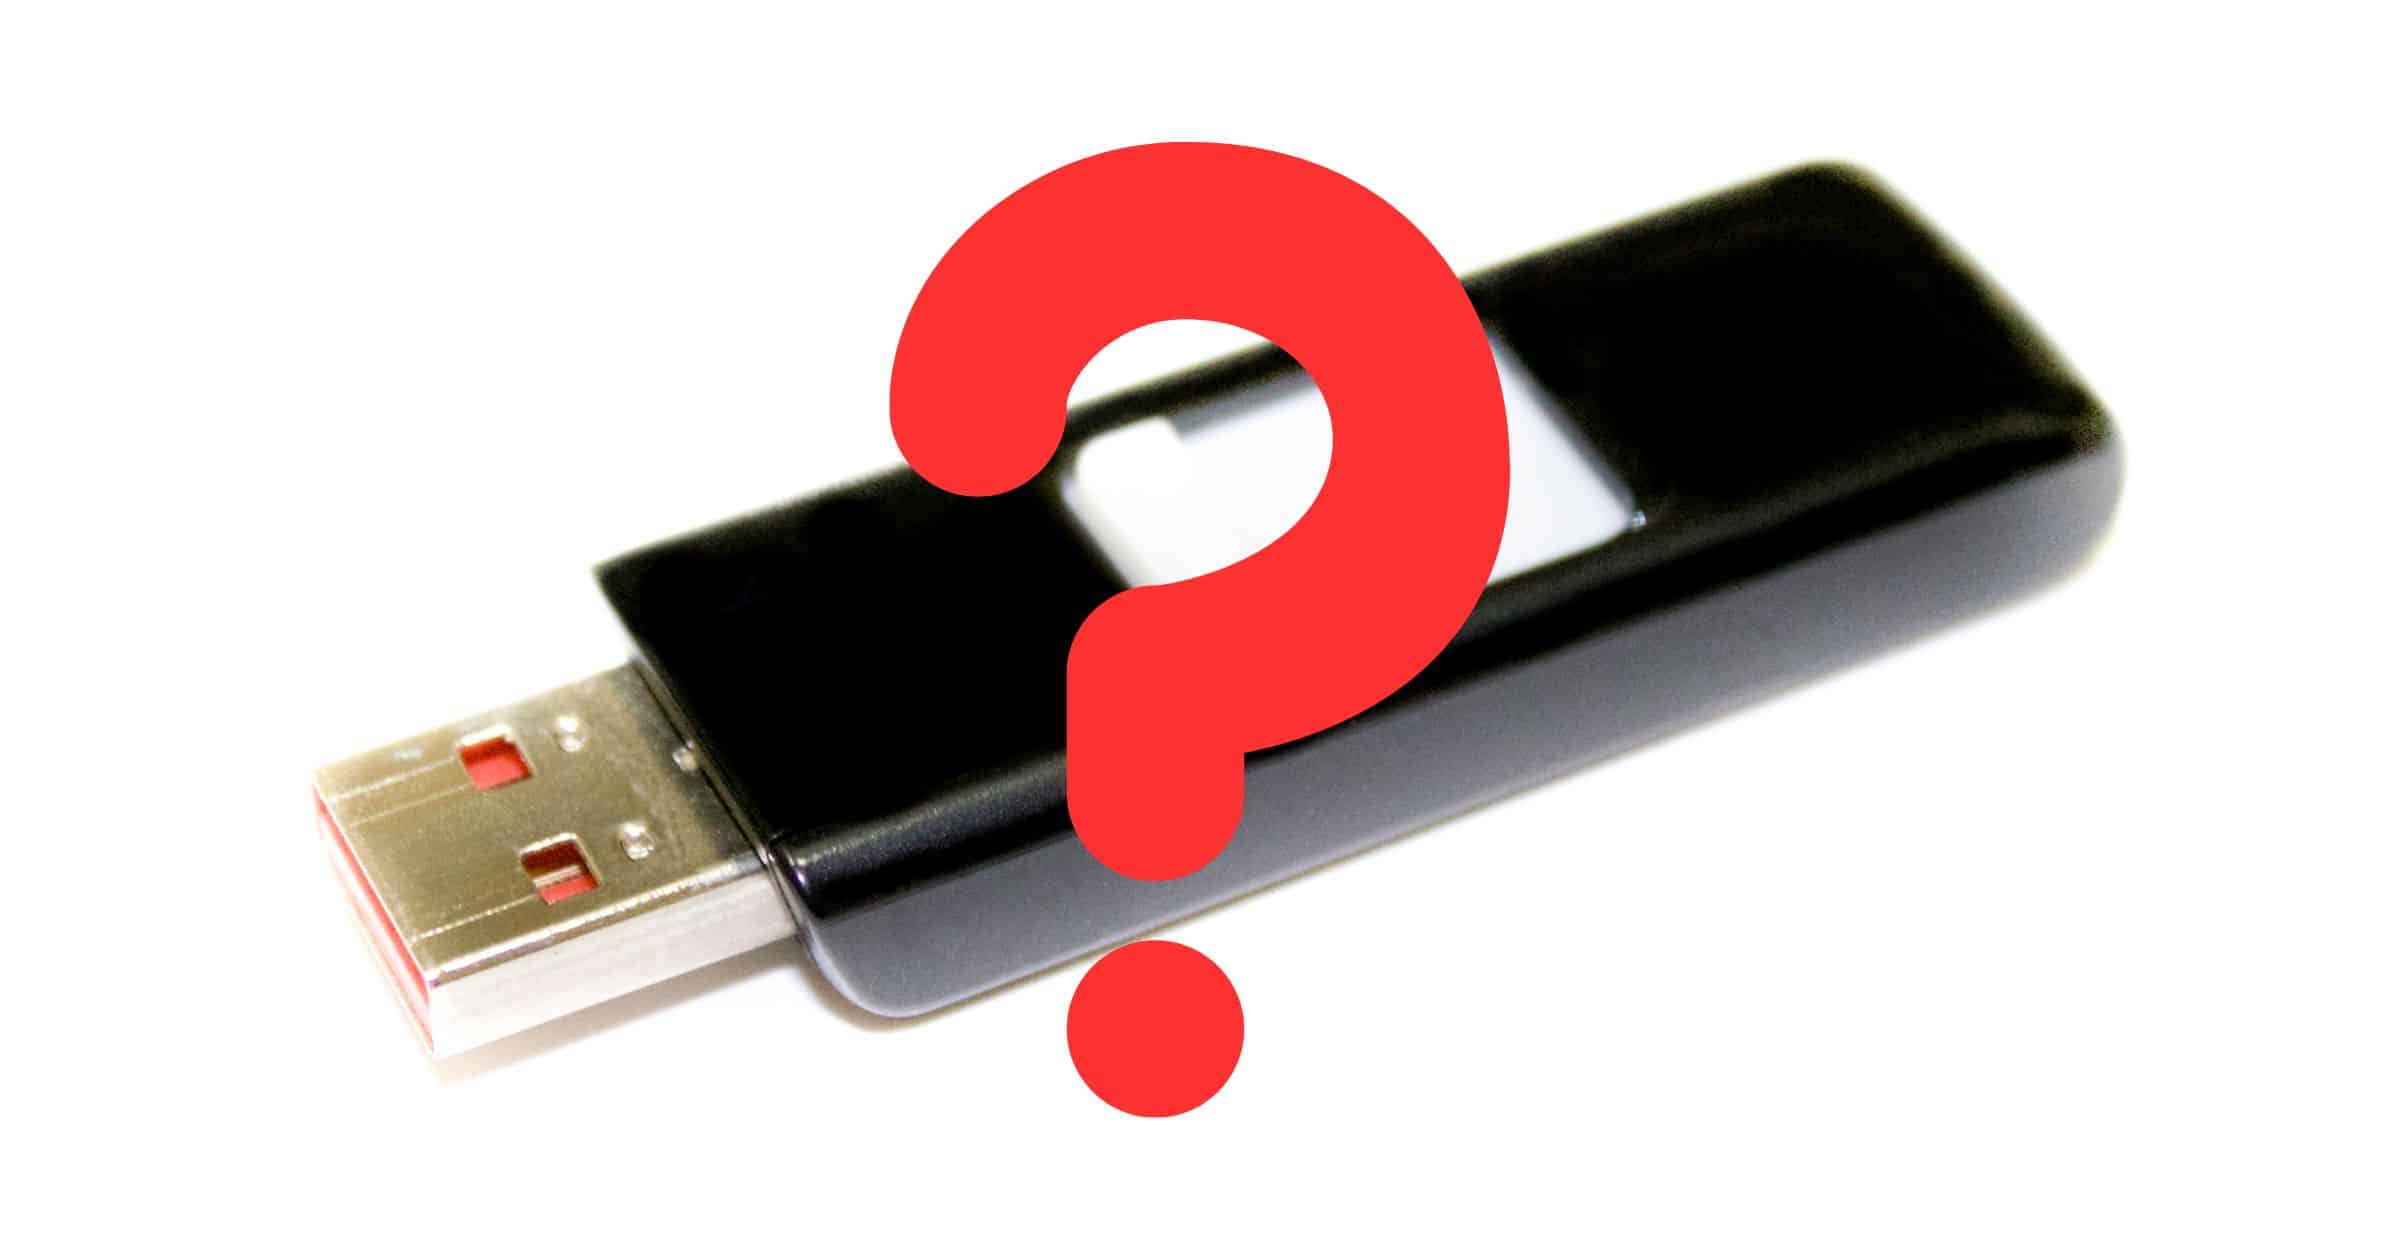 The Cheap USB Kill Stick That Destroys Any Computer You Want